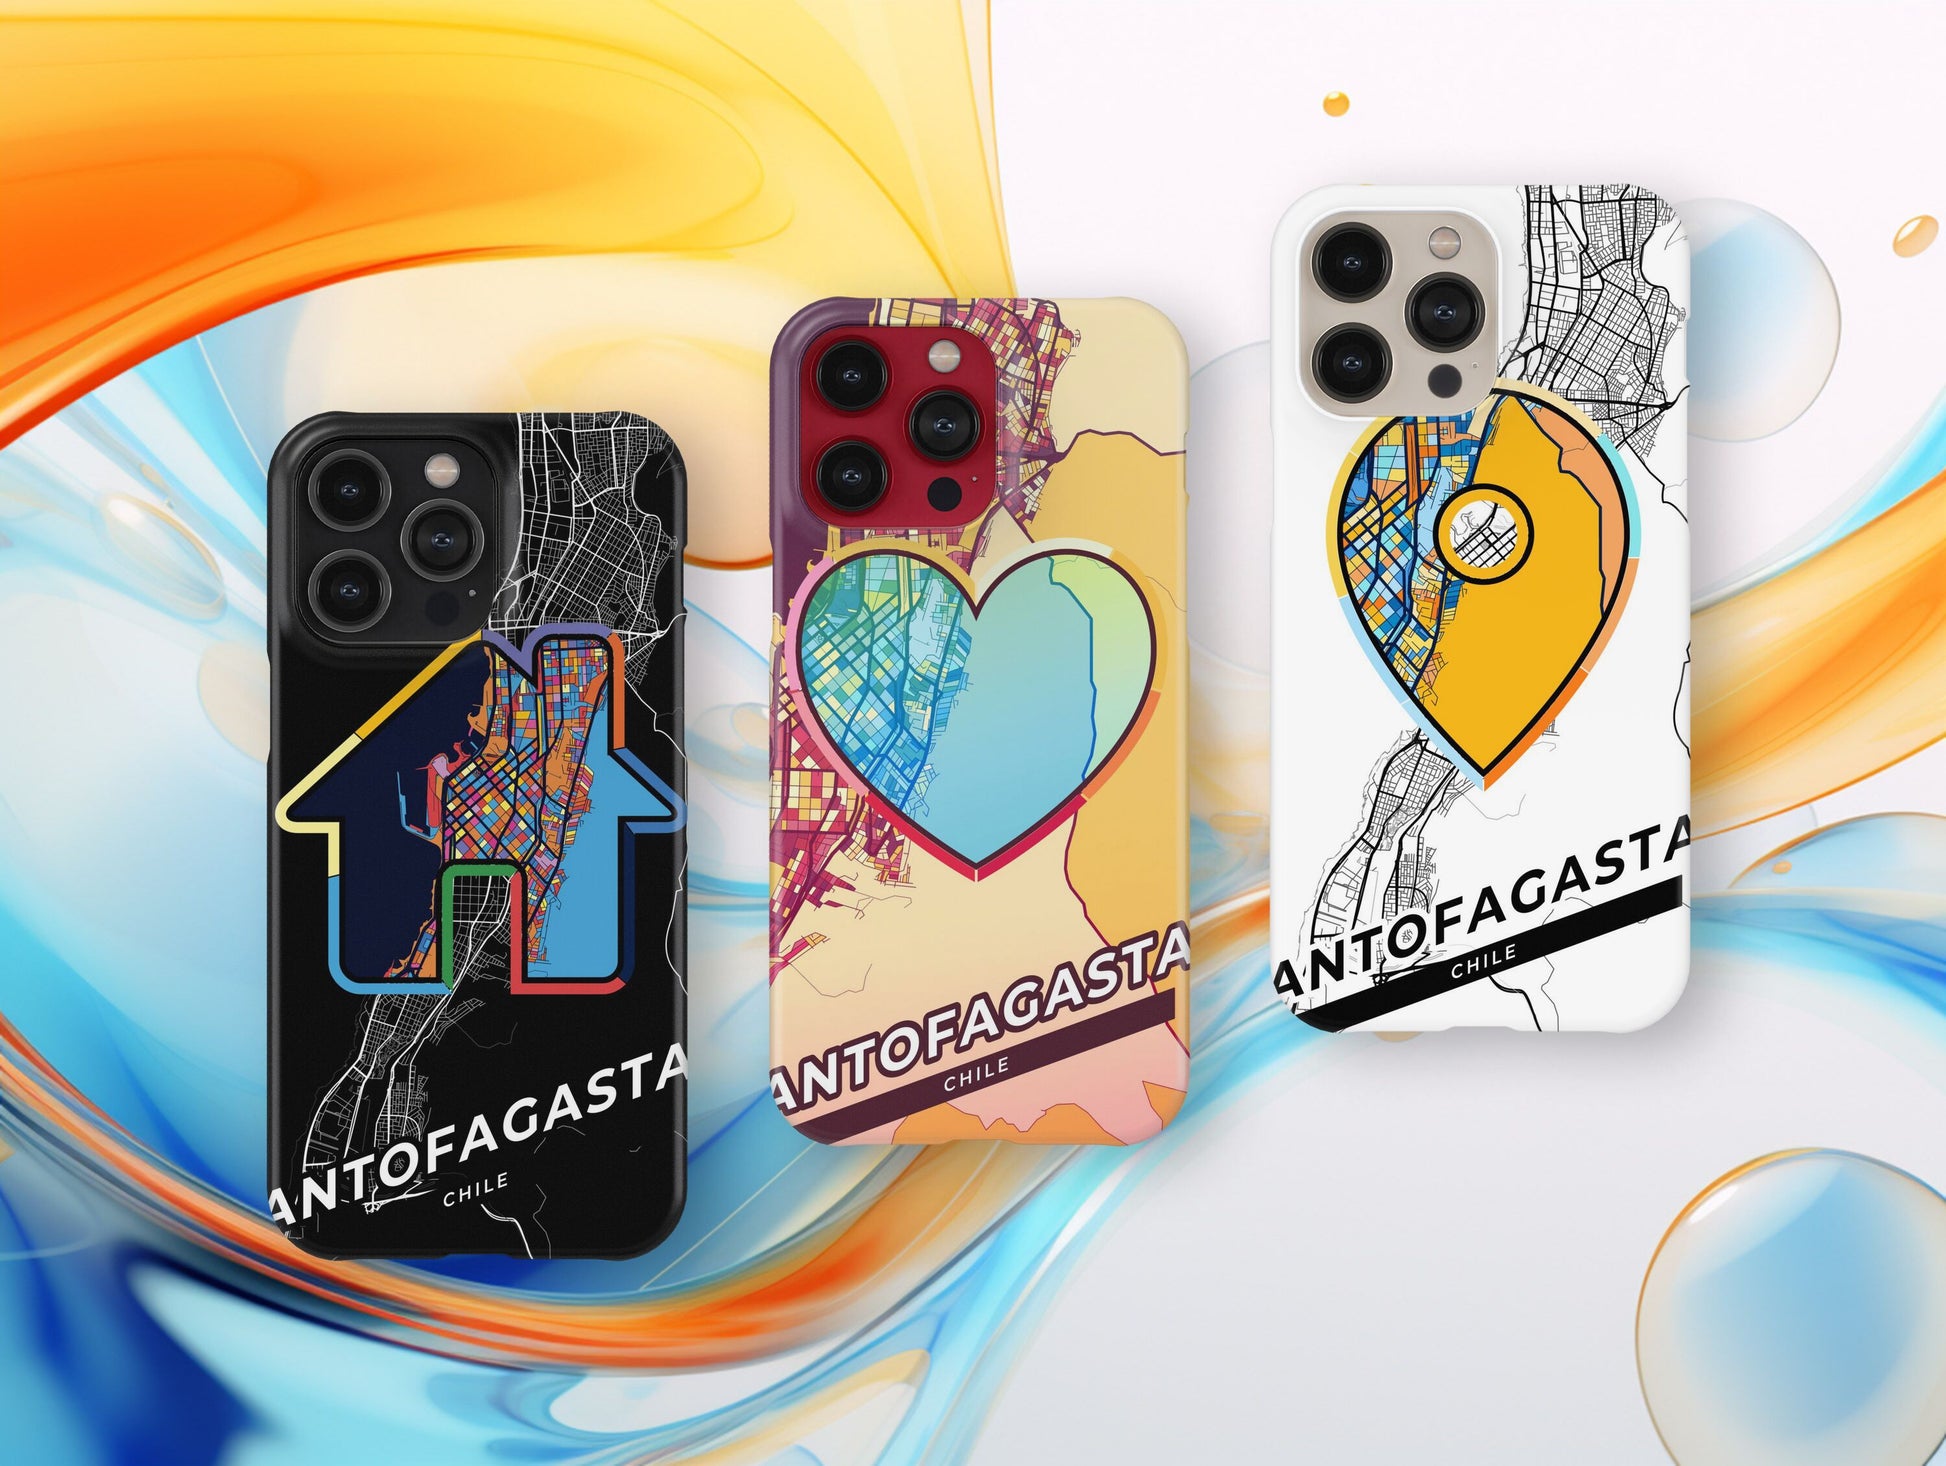 Antofagasta Chile slim phone case with colorful icon. Birthday, wedding or housewarming gift. Couple match cases.